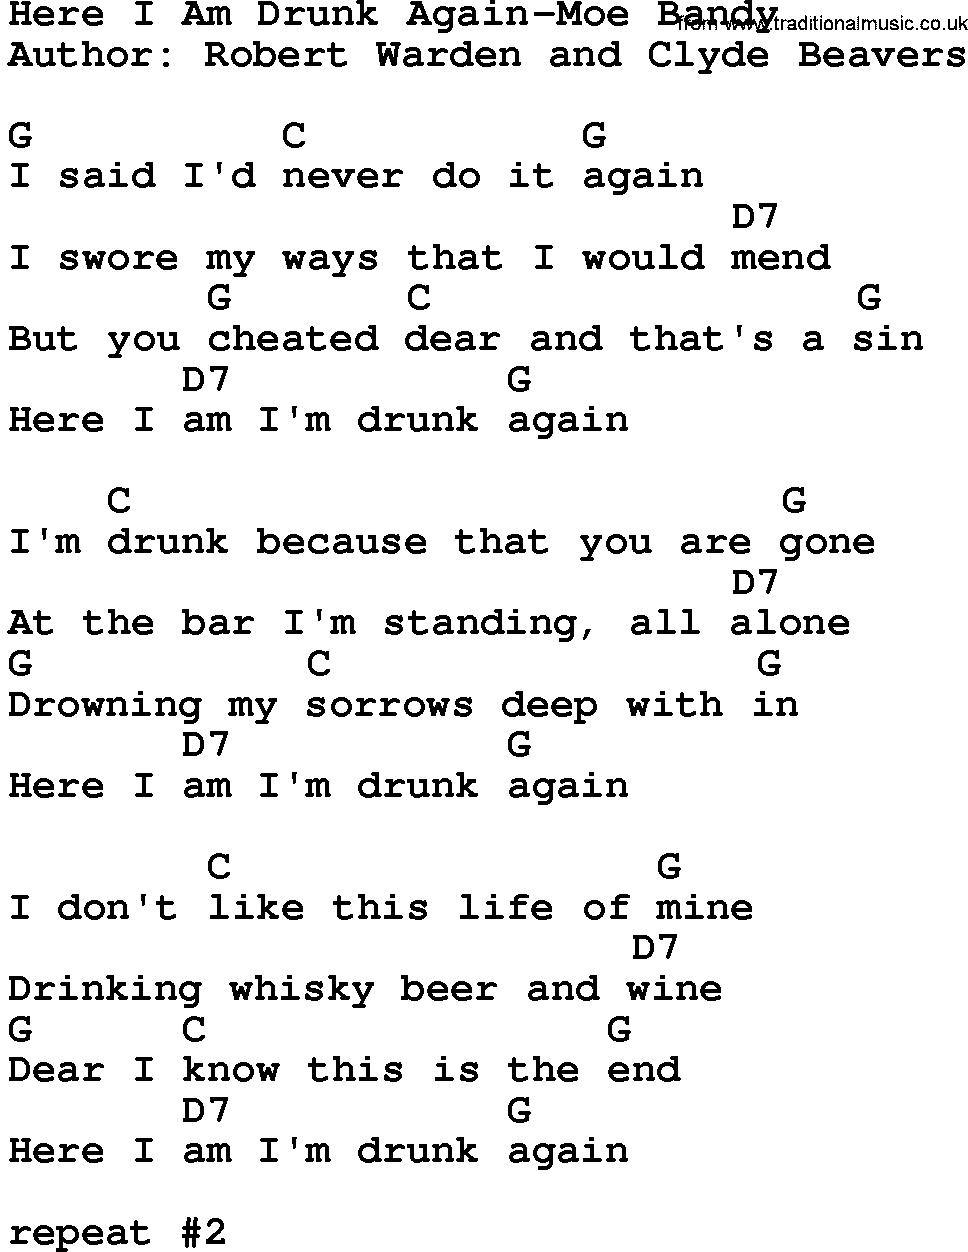 Country music song: Here I Am Drunk Again-Moe Bandy lyrics and chords